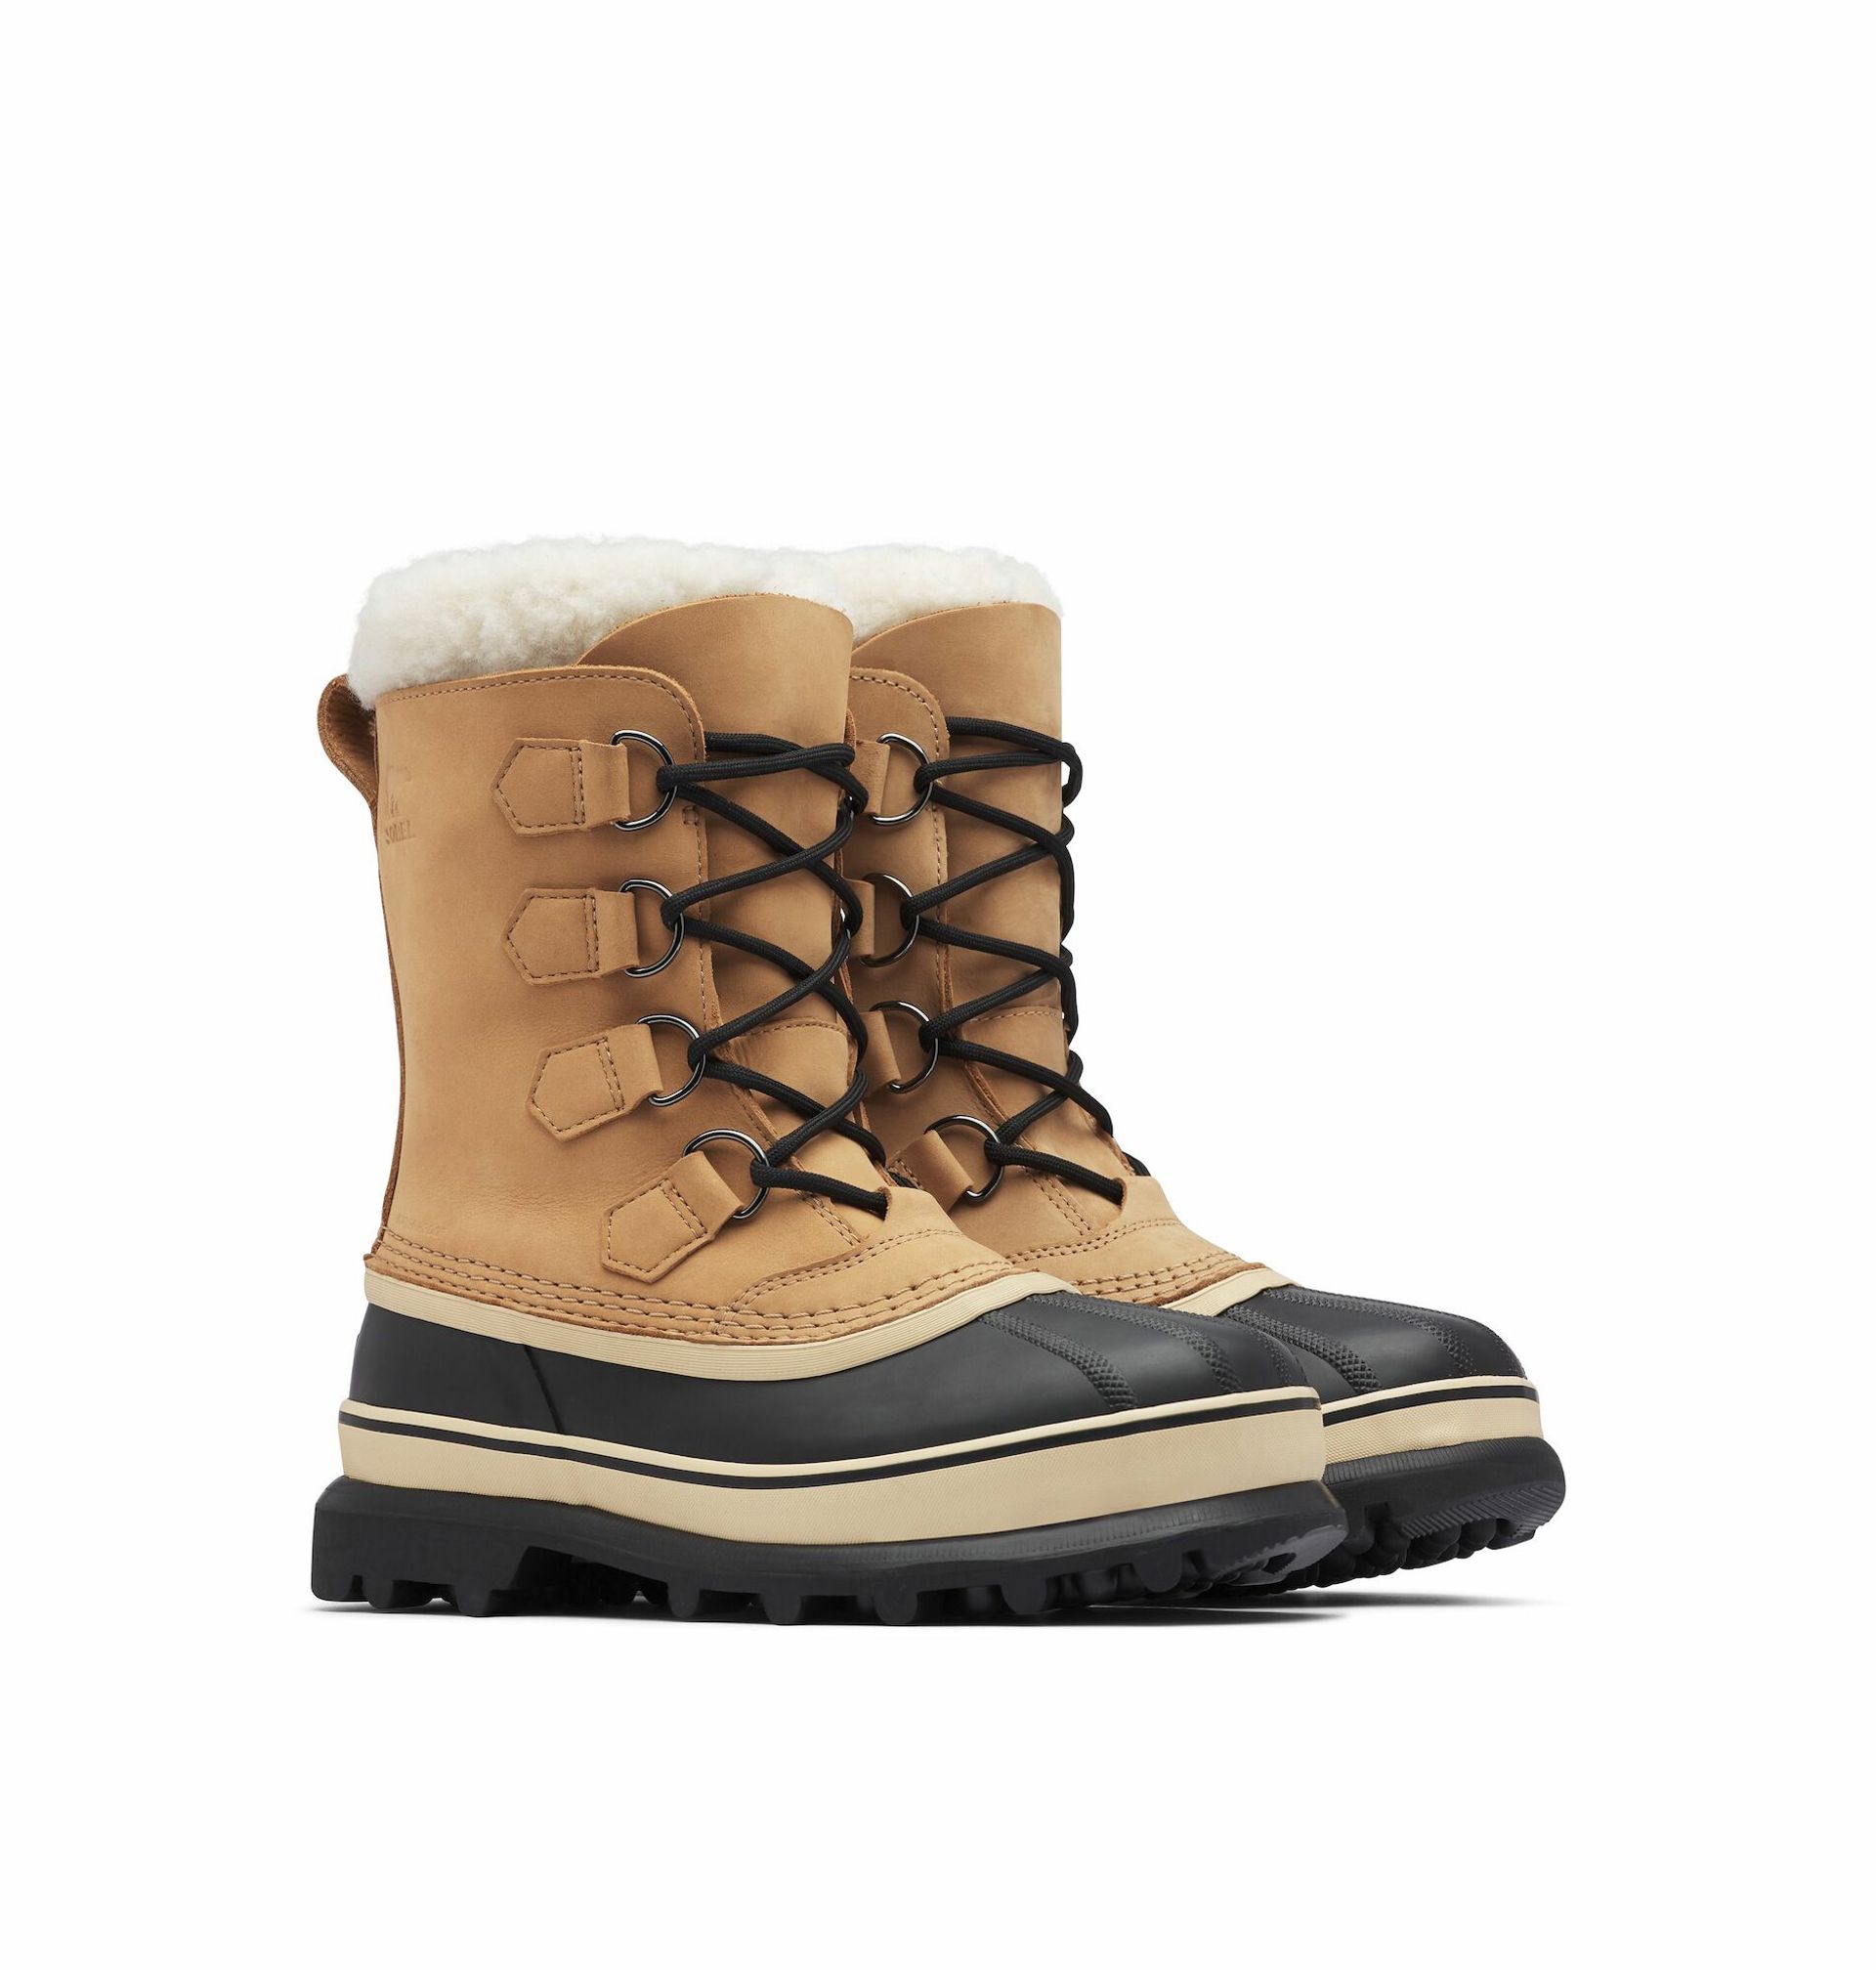 Which shoes to pack for winter in Lofoten - Sorel Caribou Boots